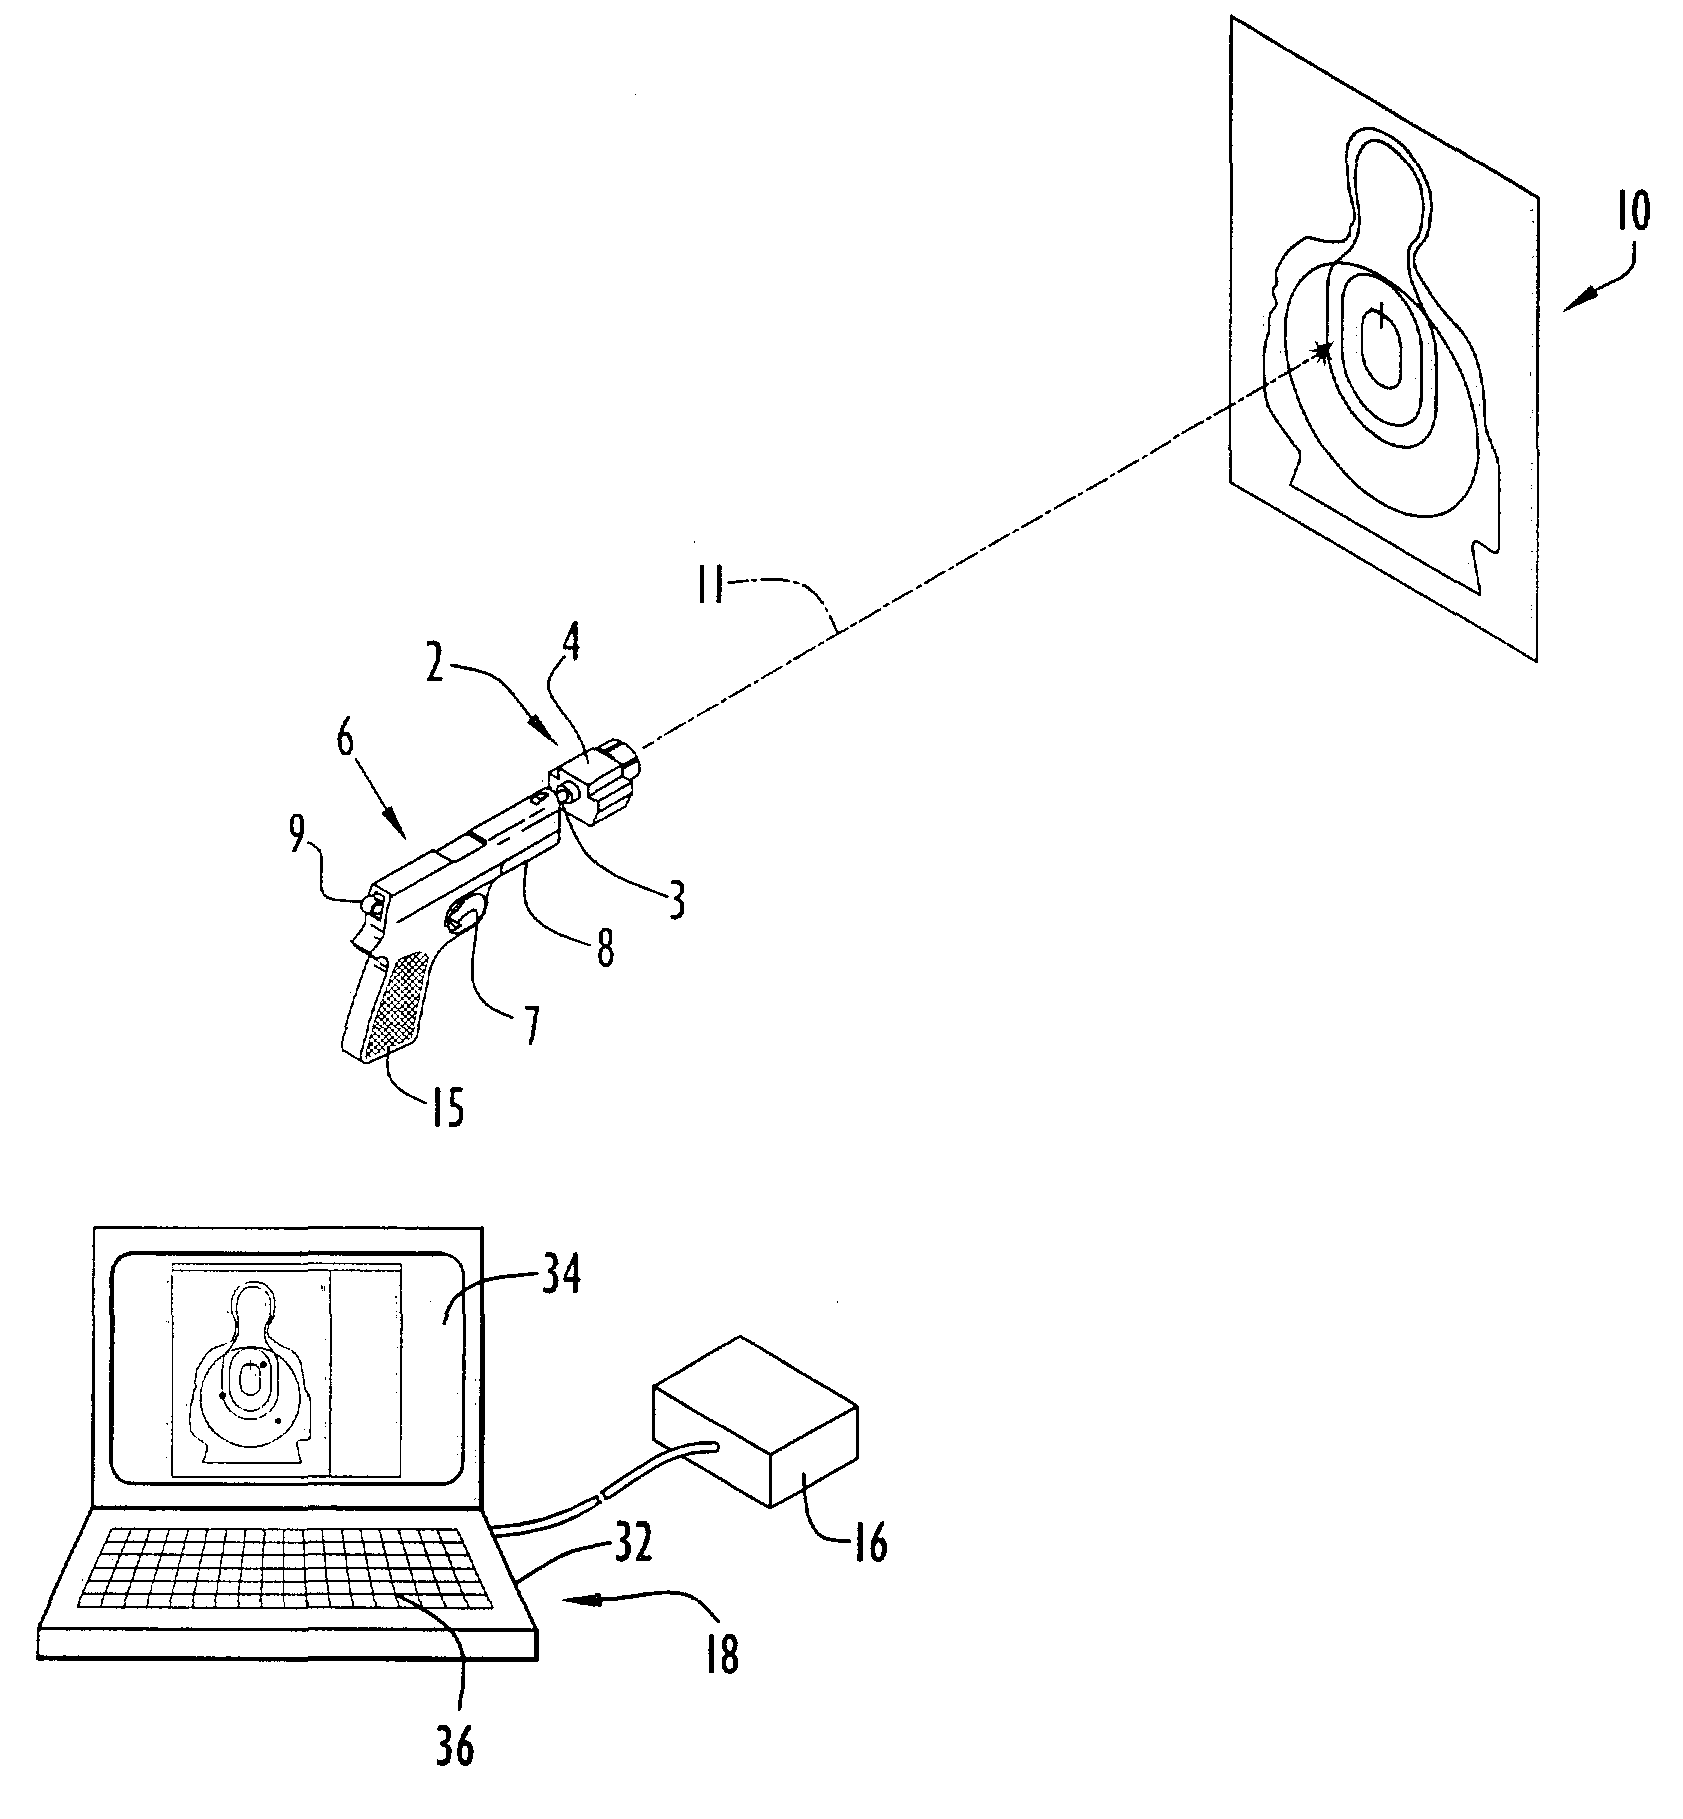 Firearm laser training system and method facilitating firearm training with various targets and visual feedback of simulated projectile impact locations